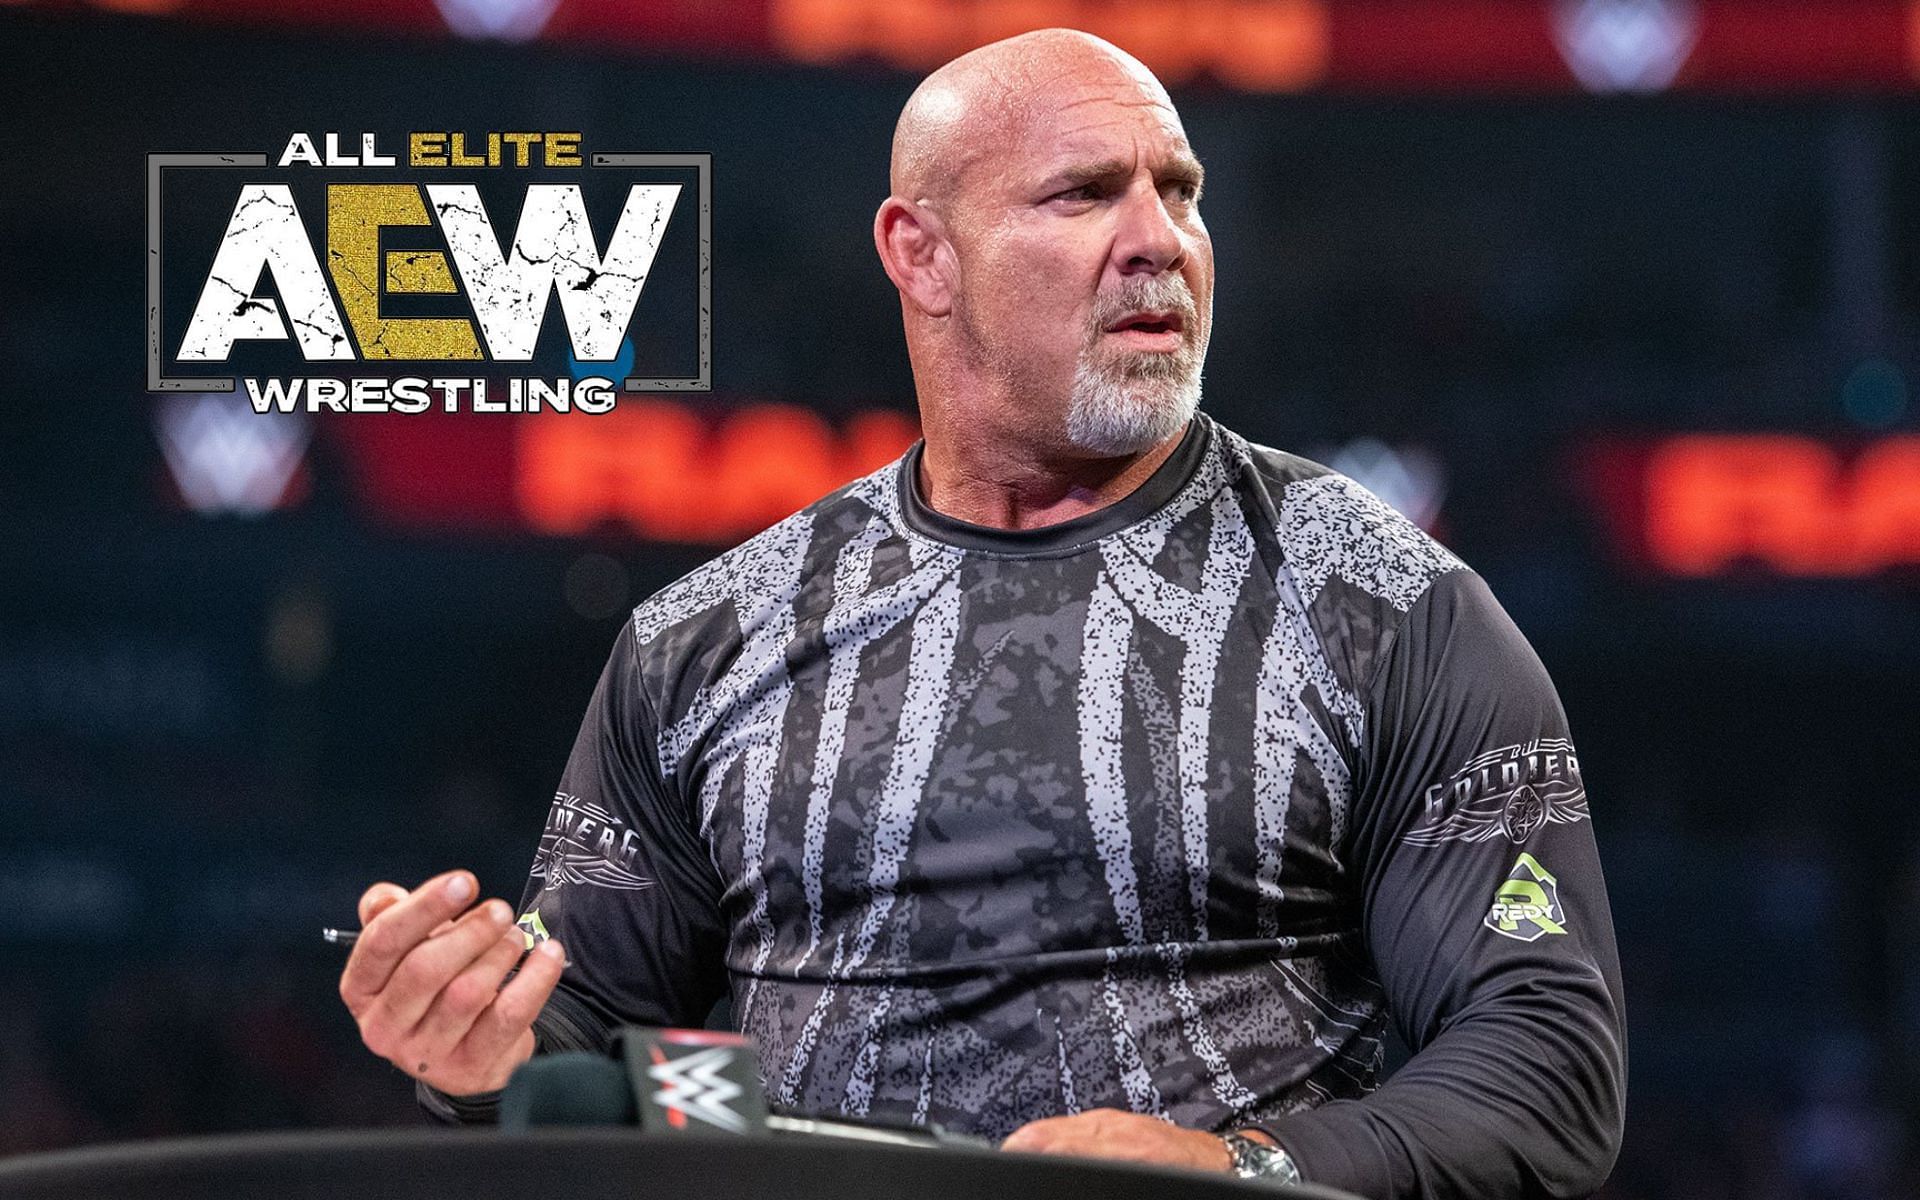 WWE Hall of Famer Goldberg had an issue with this AEW star.